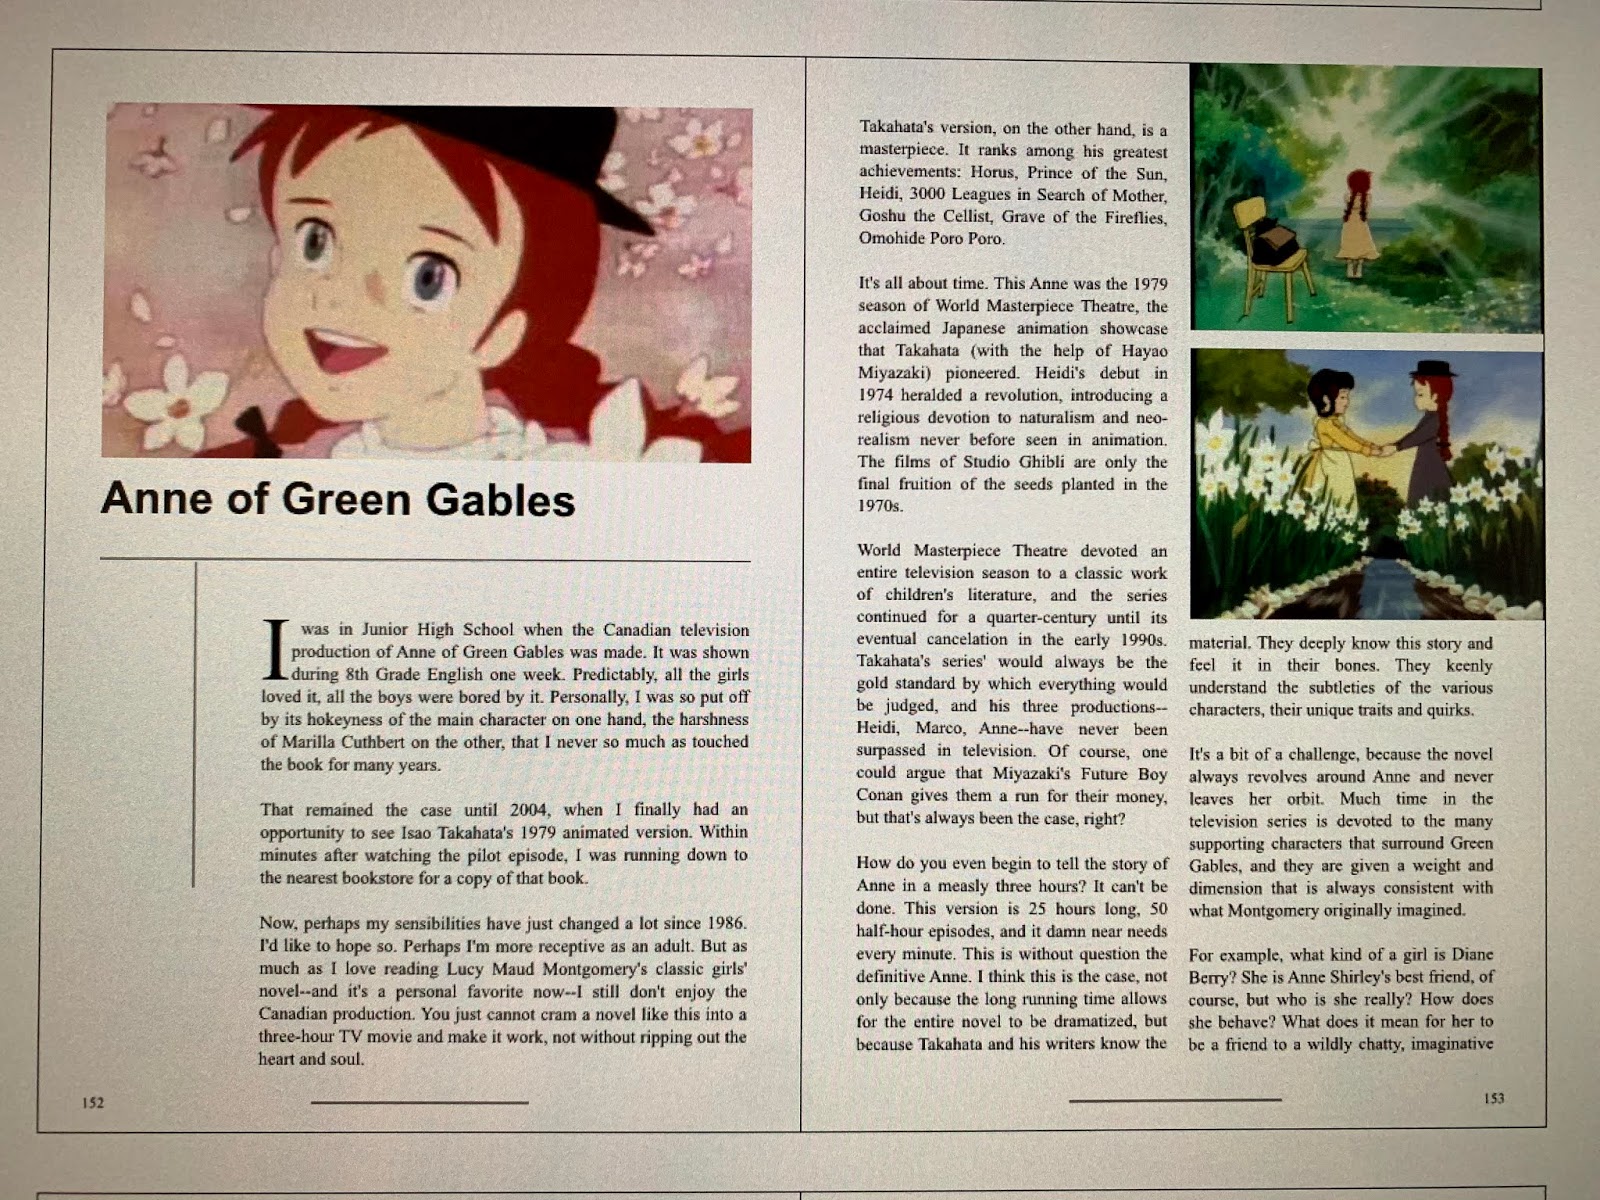 One of my friend just watched Grave of the Fireflies and made this. I just  wanted to show it to the world and let him know what others think of it. 